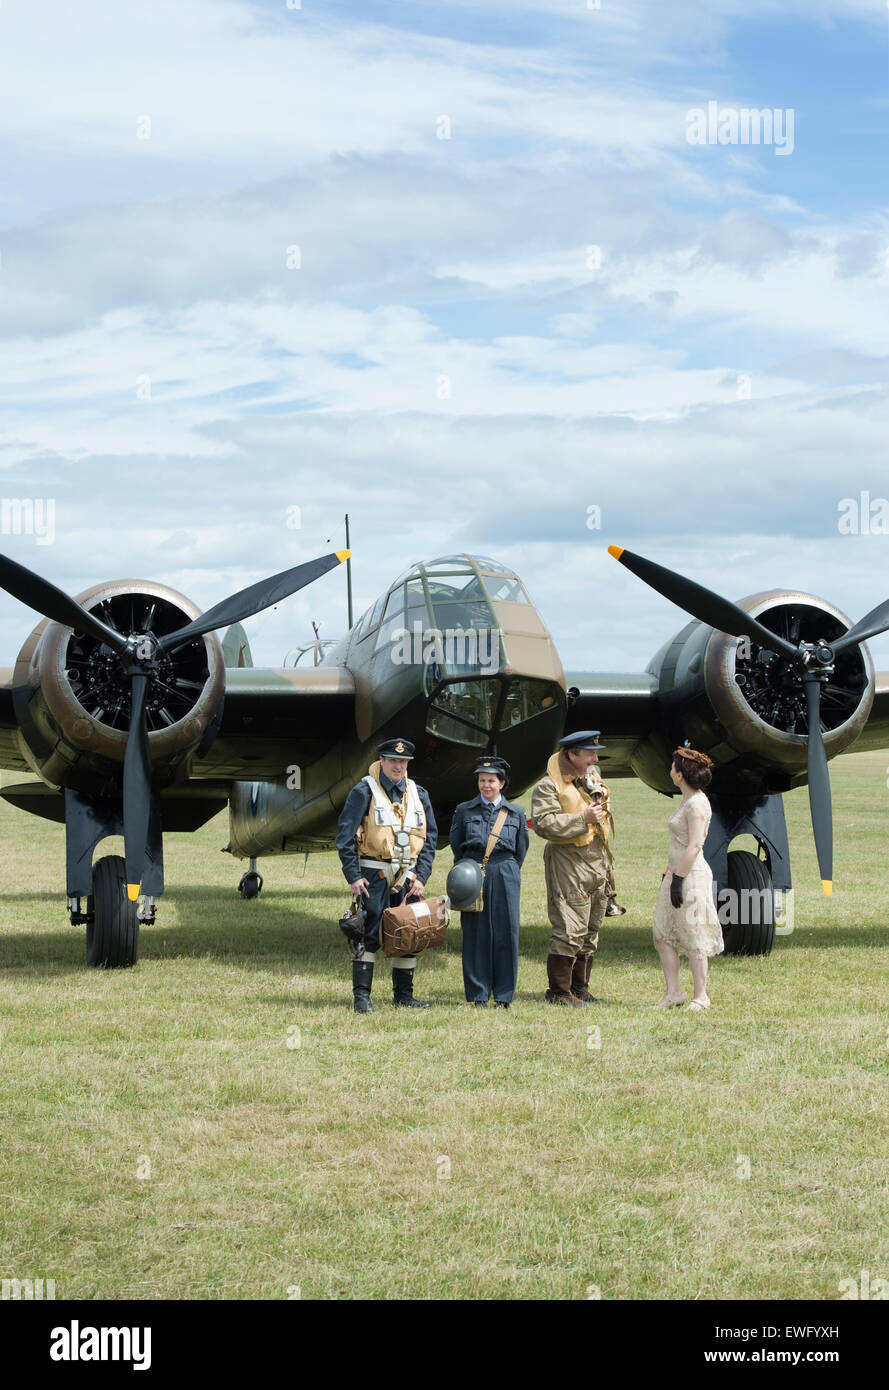 Air Force Re enactors in front of a Bristol Blenheim Bomber at Bicester flywheel festival. Oxfordshire, England Stock Photo